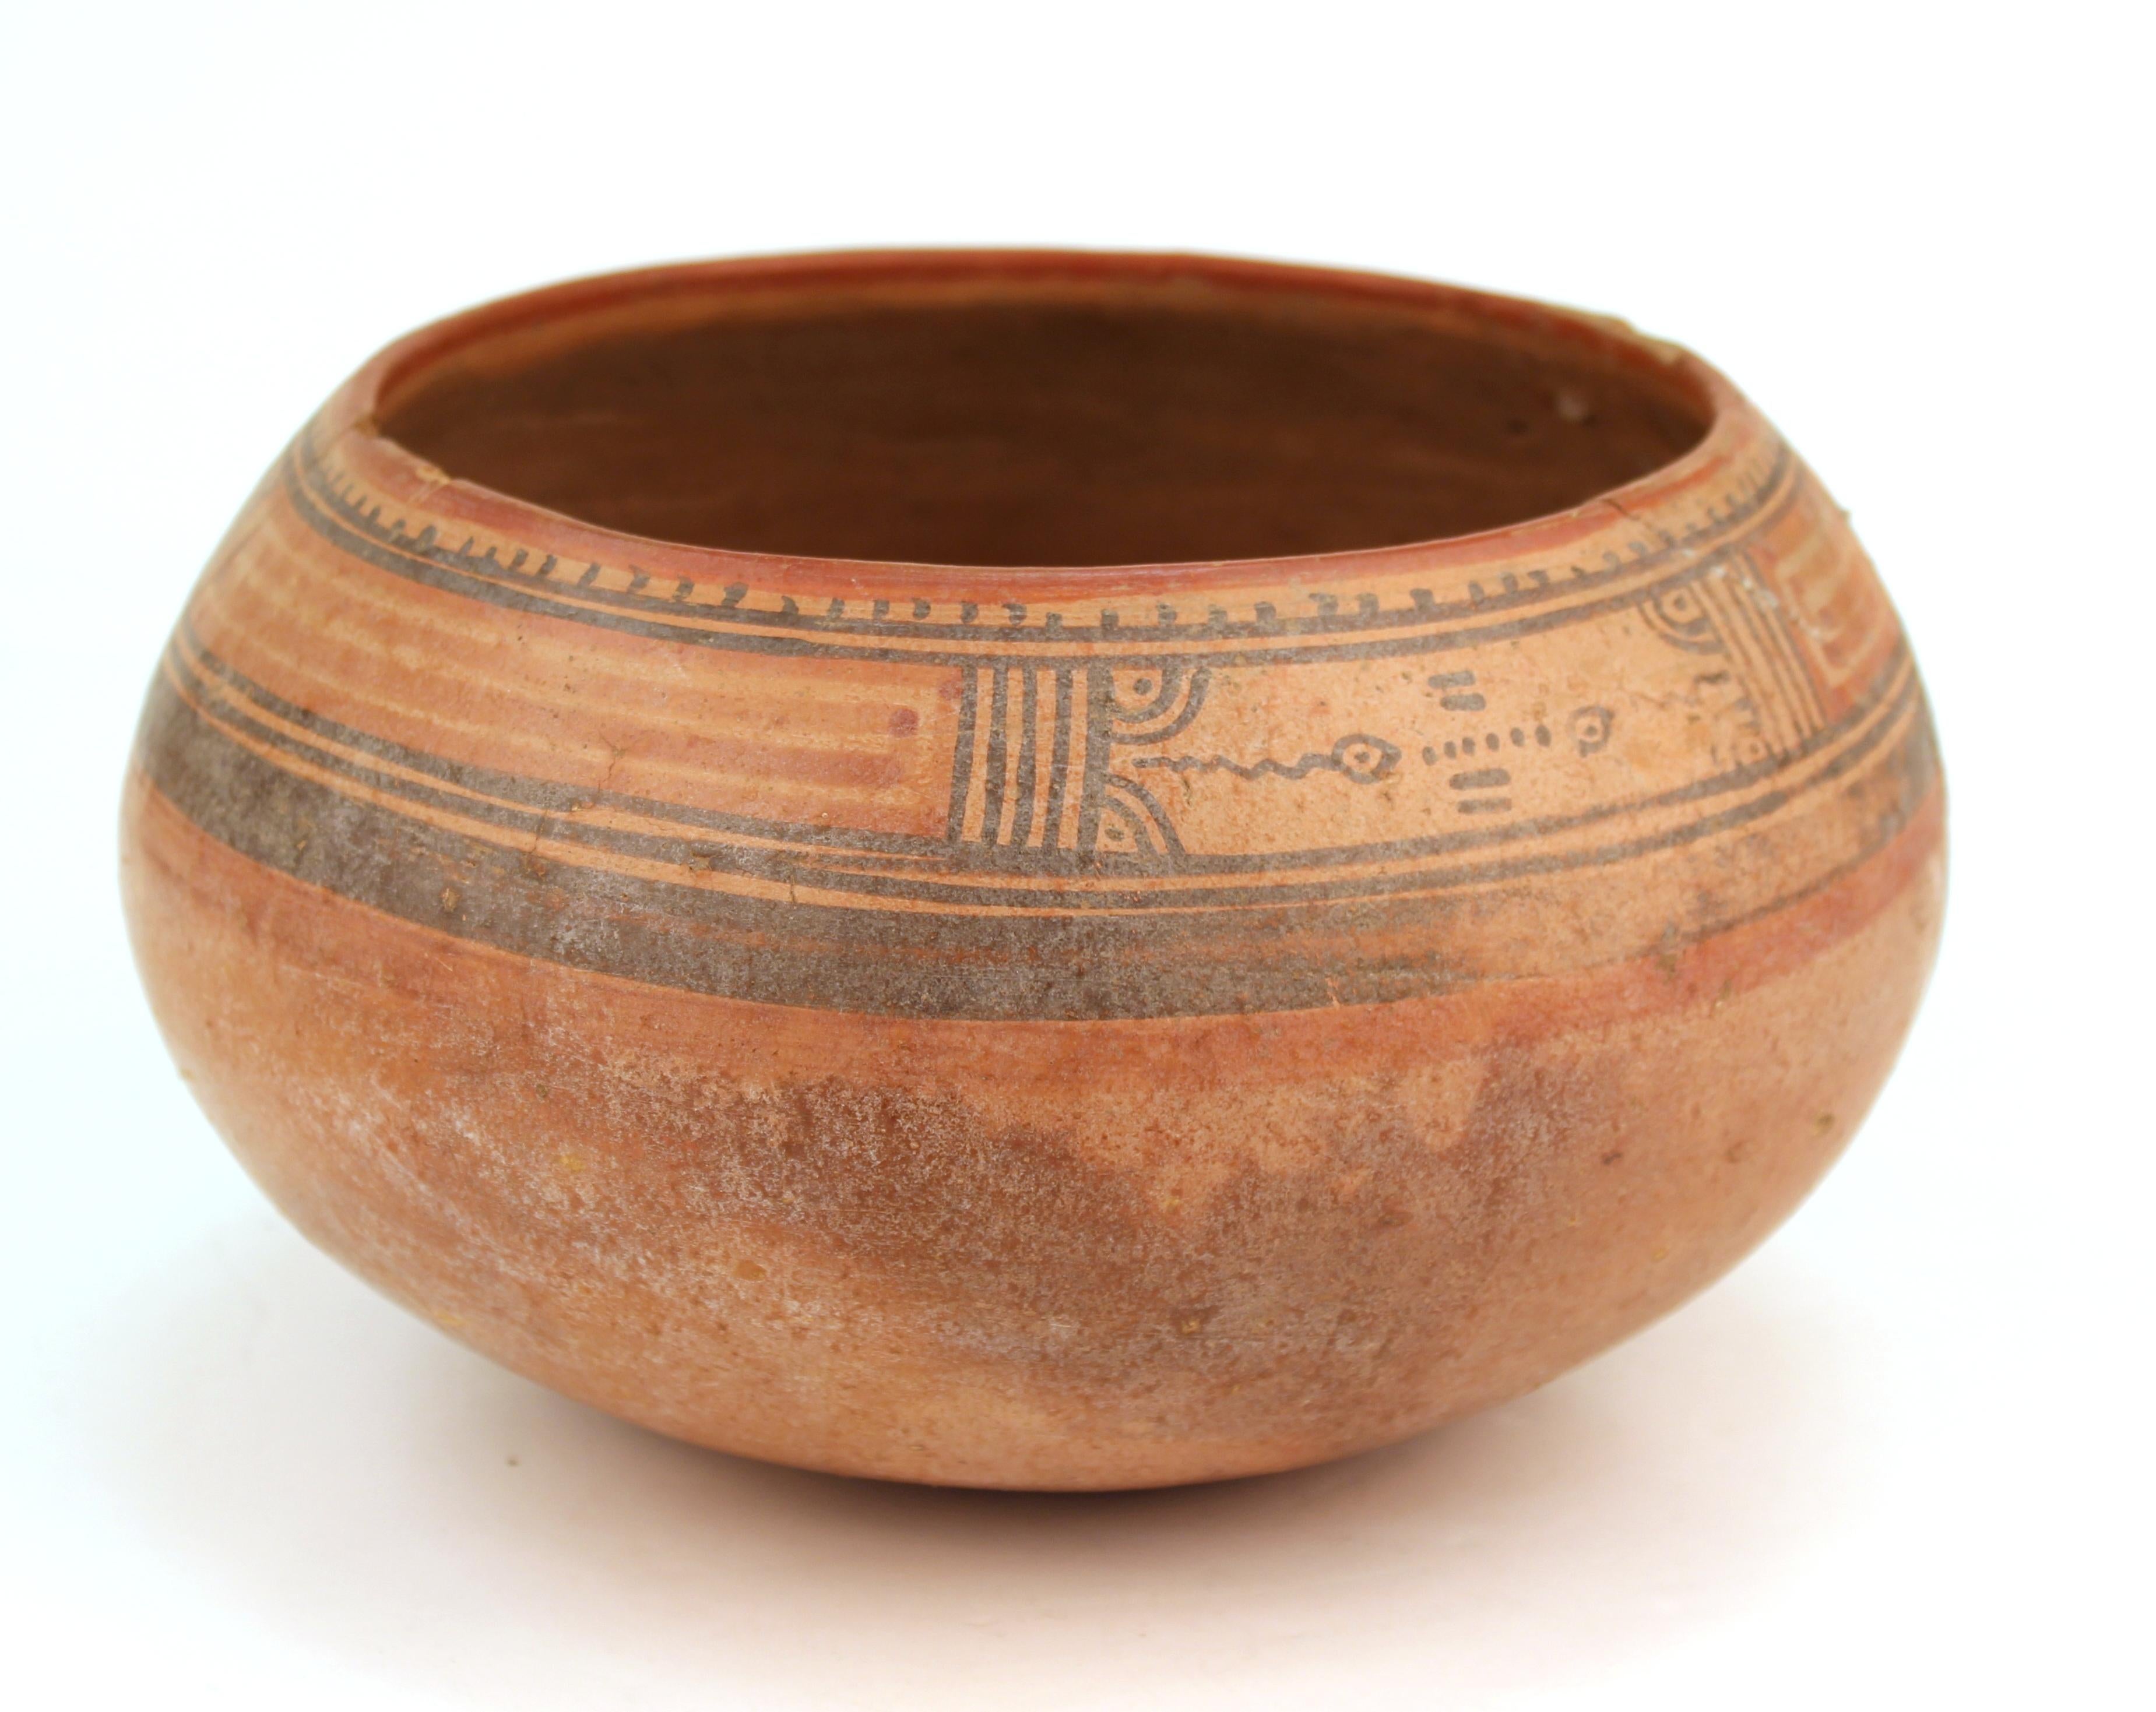 Pre-Columbian Nicoya pottery bowl from the Costa Rican Guanacaste Province, made in the 17th century. A round-bottomed red clay bowl painted with geometric designs and natural pigment decor in red and black. The piece has repaired old breaks and